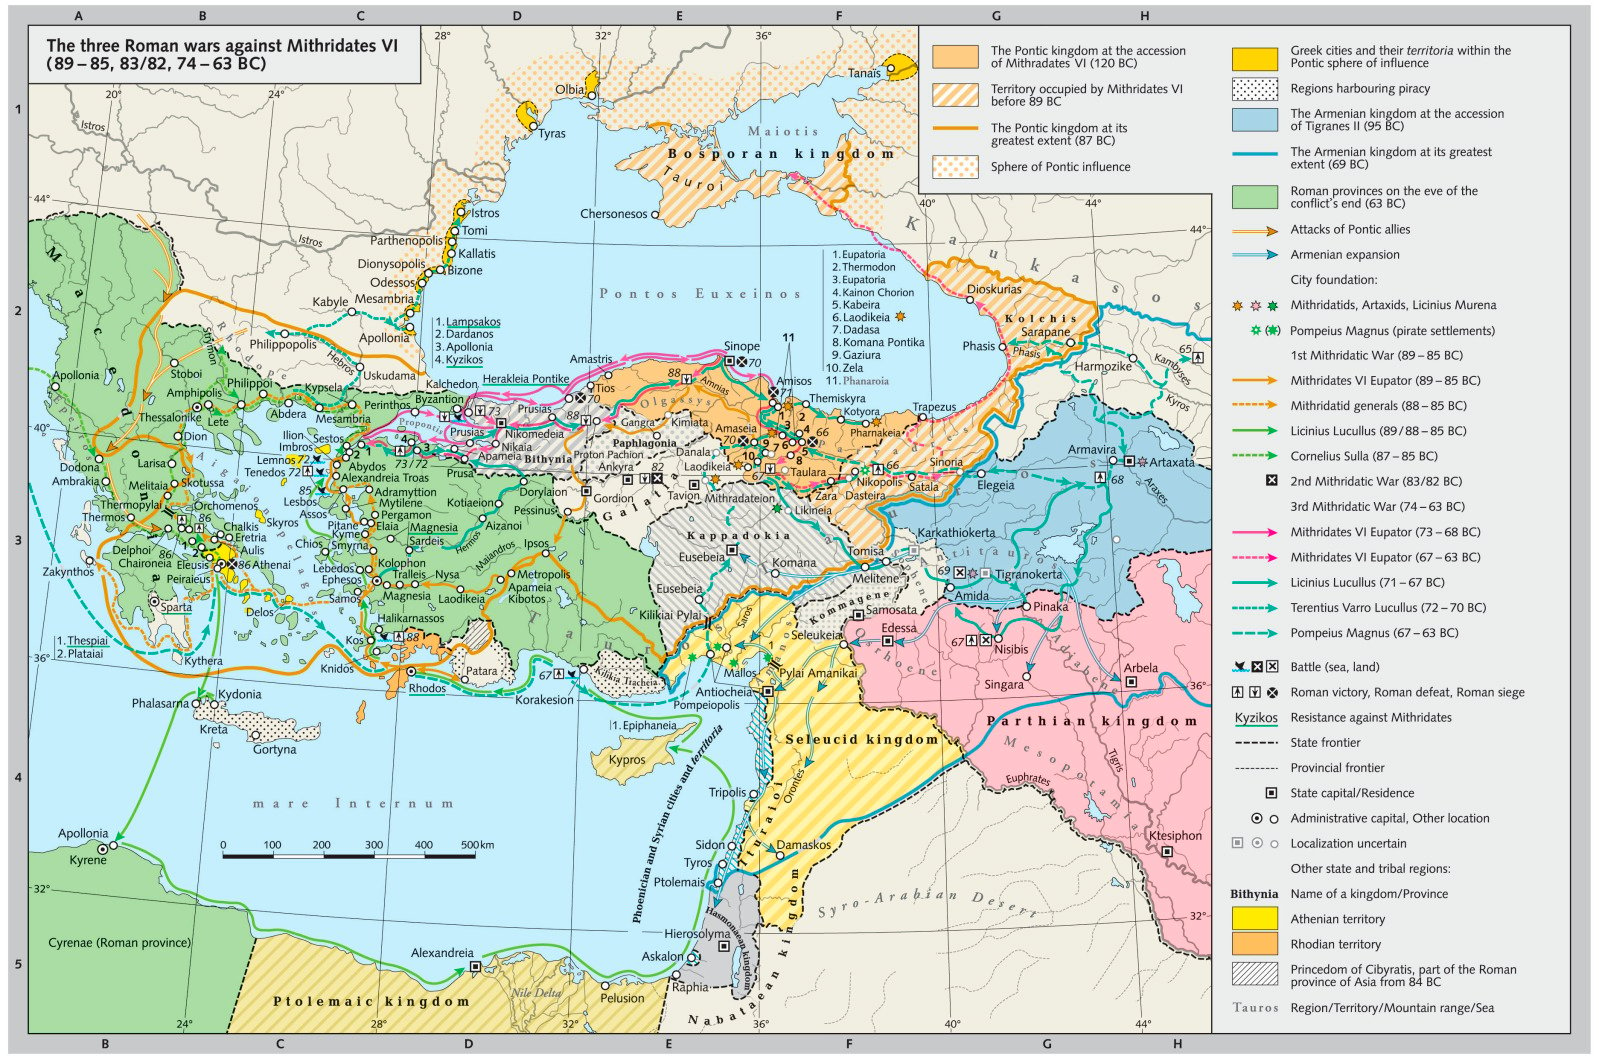  An informative map that visualizes the territorial changes and major conflict zones during the three Mithridatic Wars, with annotations for key battles, sieges, and political shifts in the Pontic, Seleucid, and Roman territories influenced by Mithridates VI's campaigns against Rome from 89 to 63 BC.